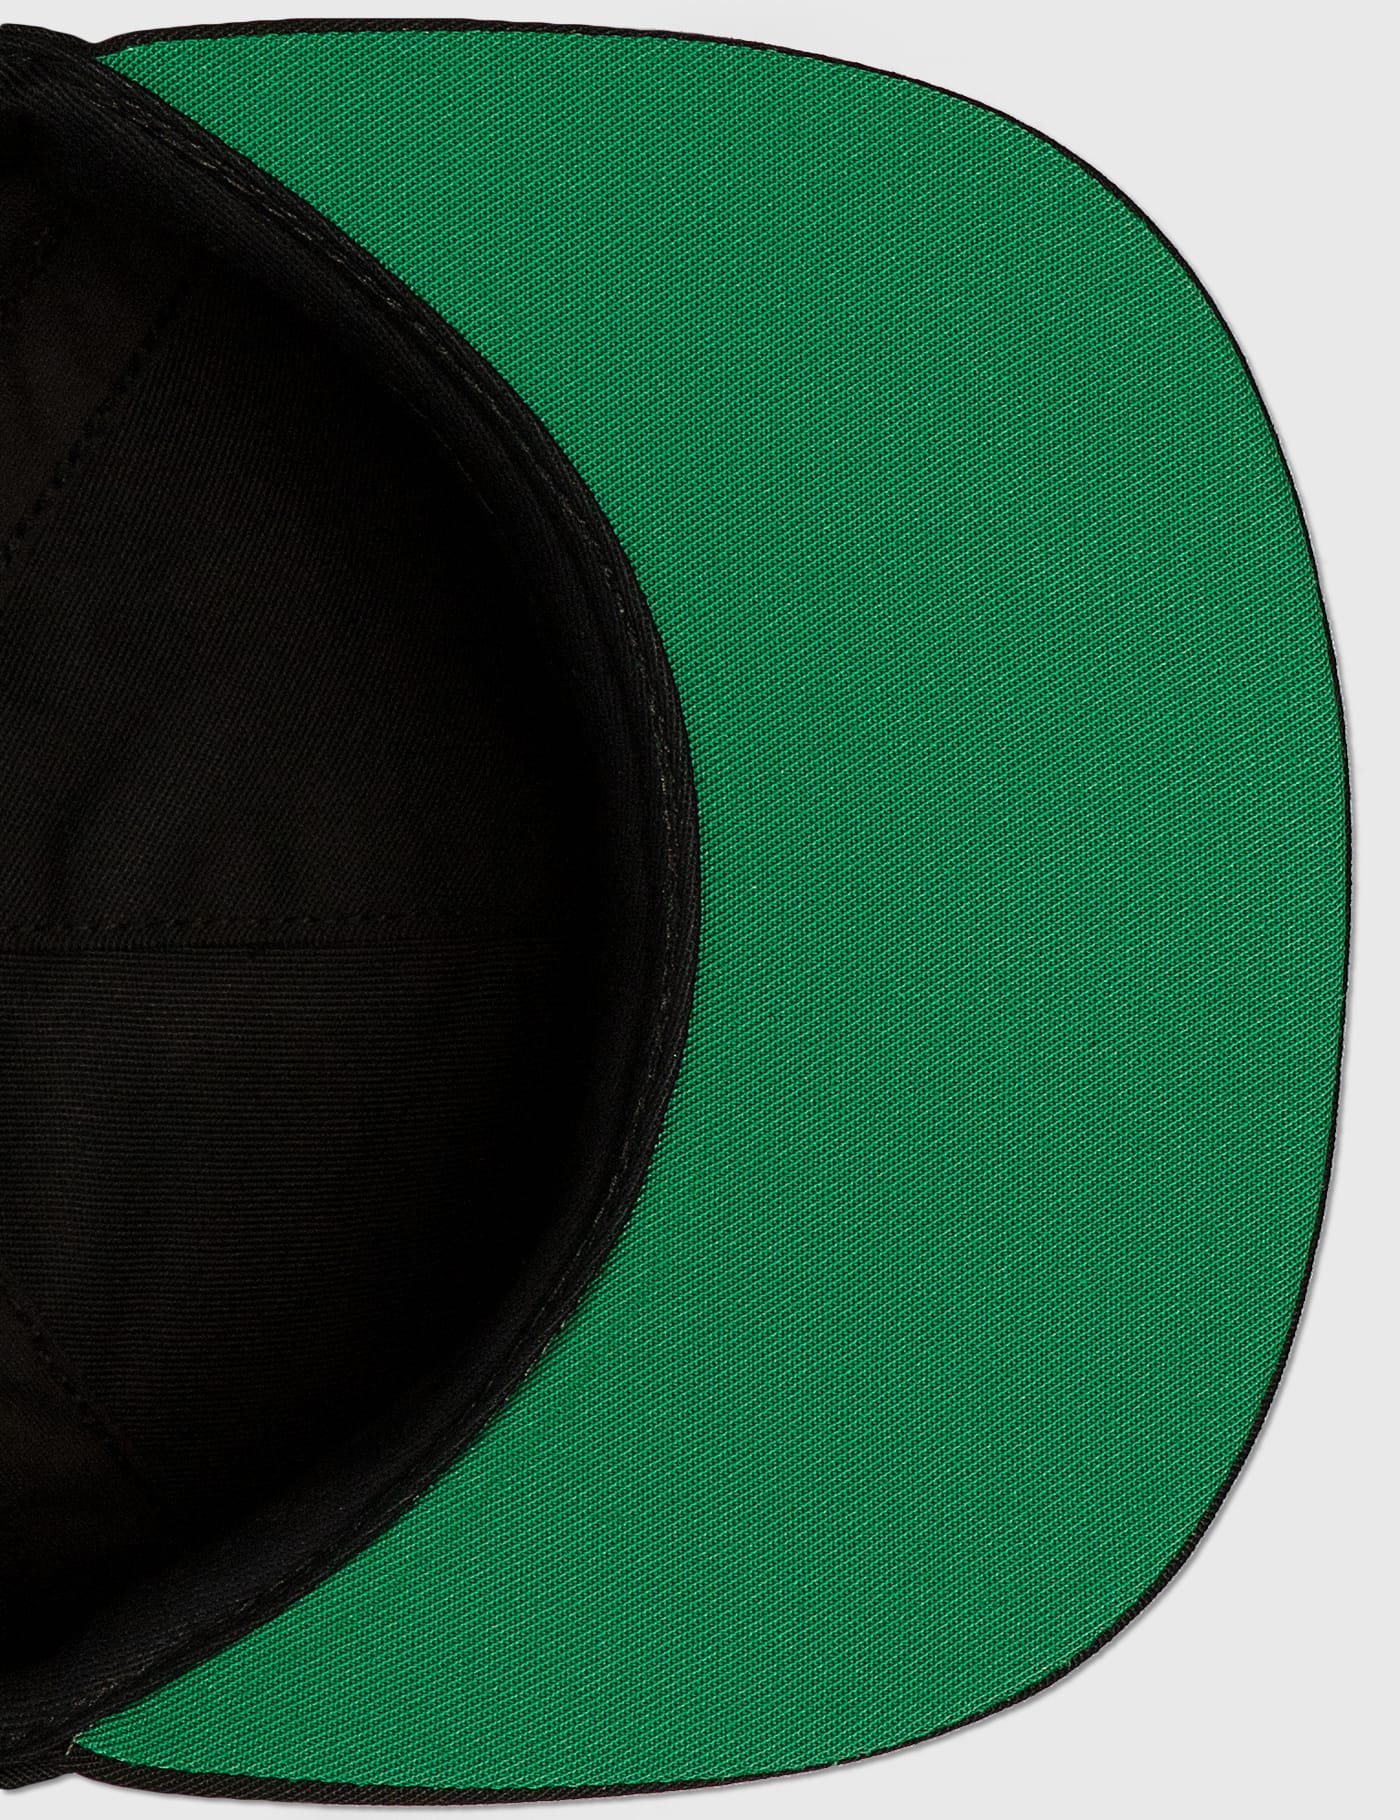 Rhude - Podium Cap | HBX - Globally Curated Fashion and Lifestyle